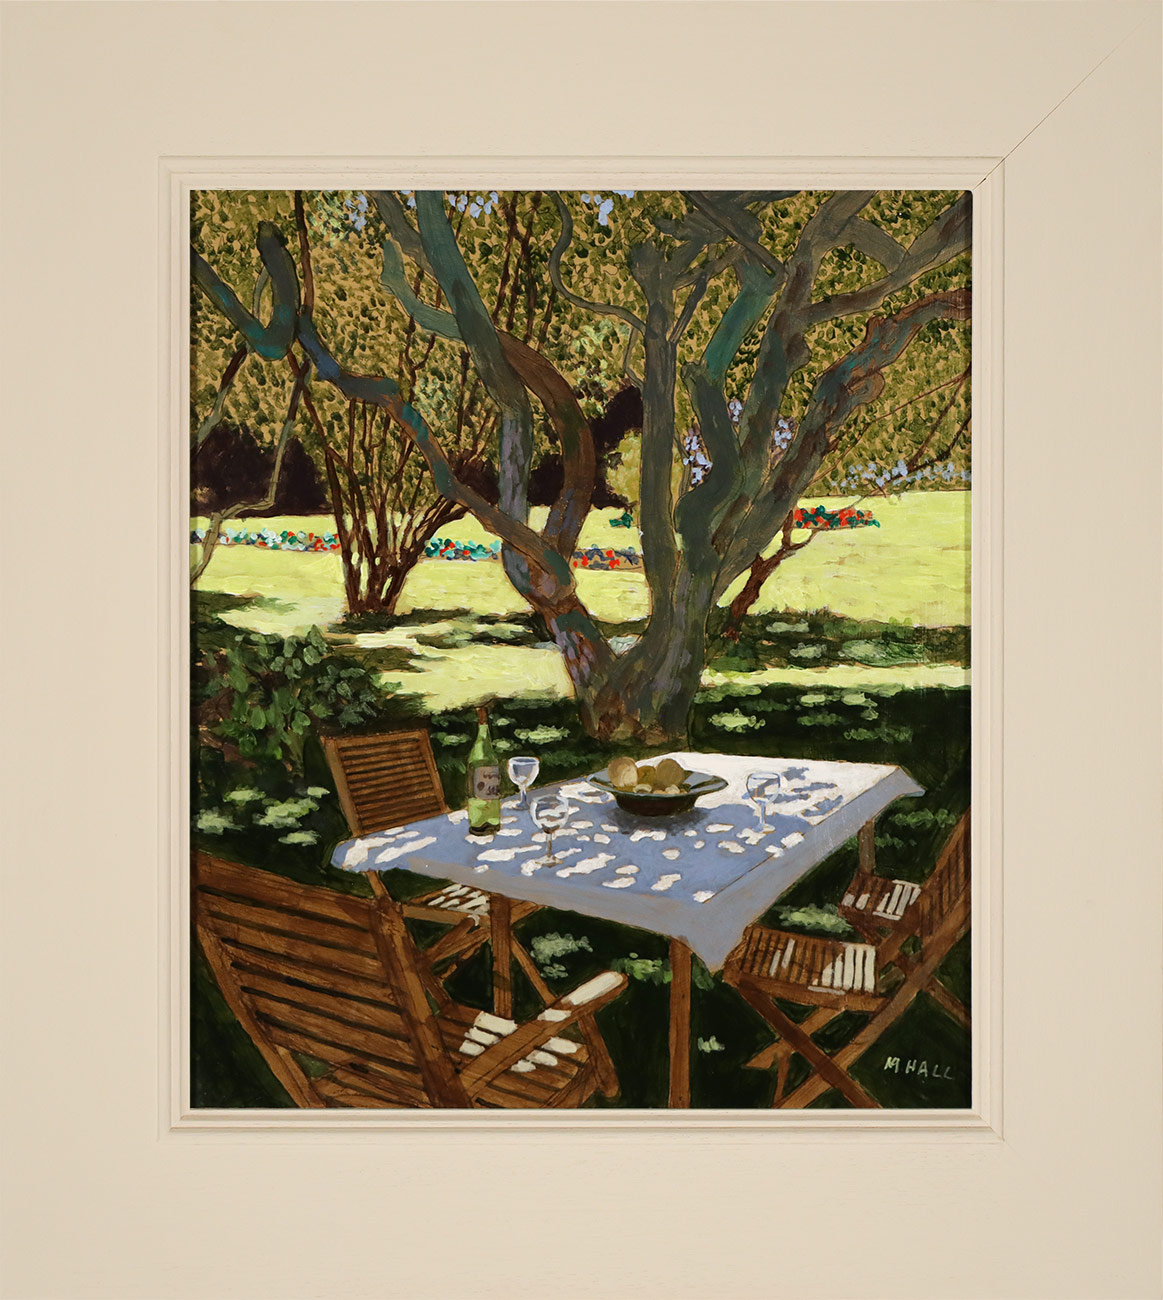 Mike Hall, Original acrylic painting on board, Cool Drinks in the Orchard. Click to enlarge